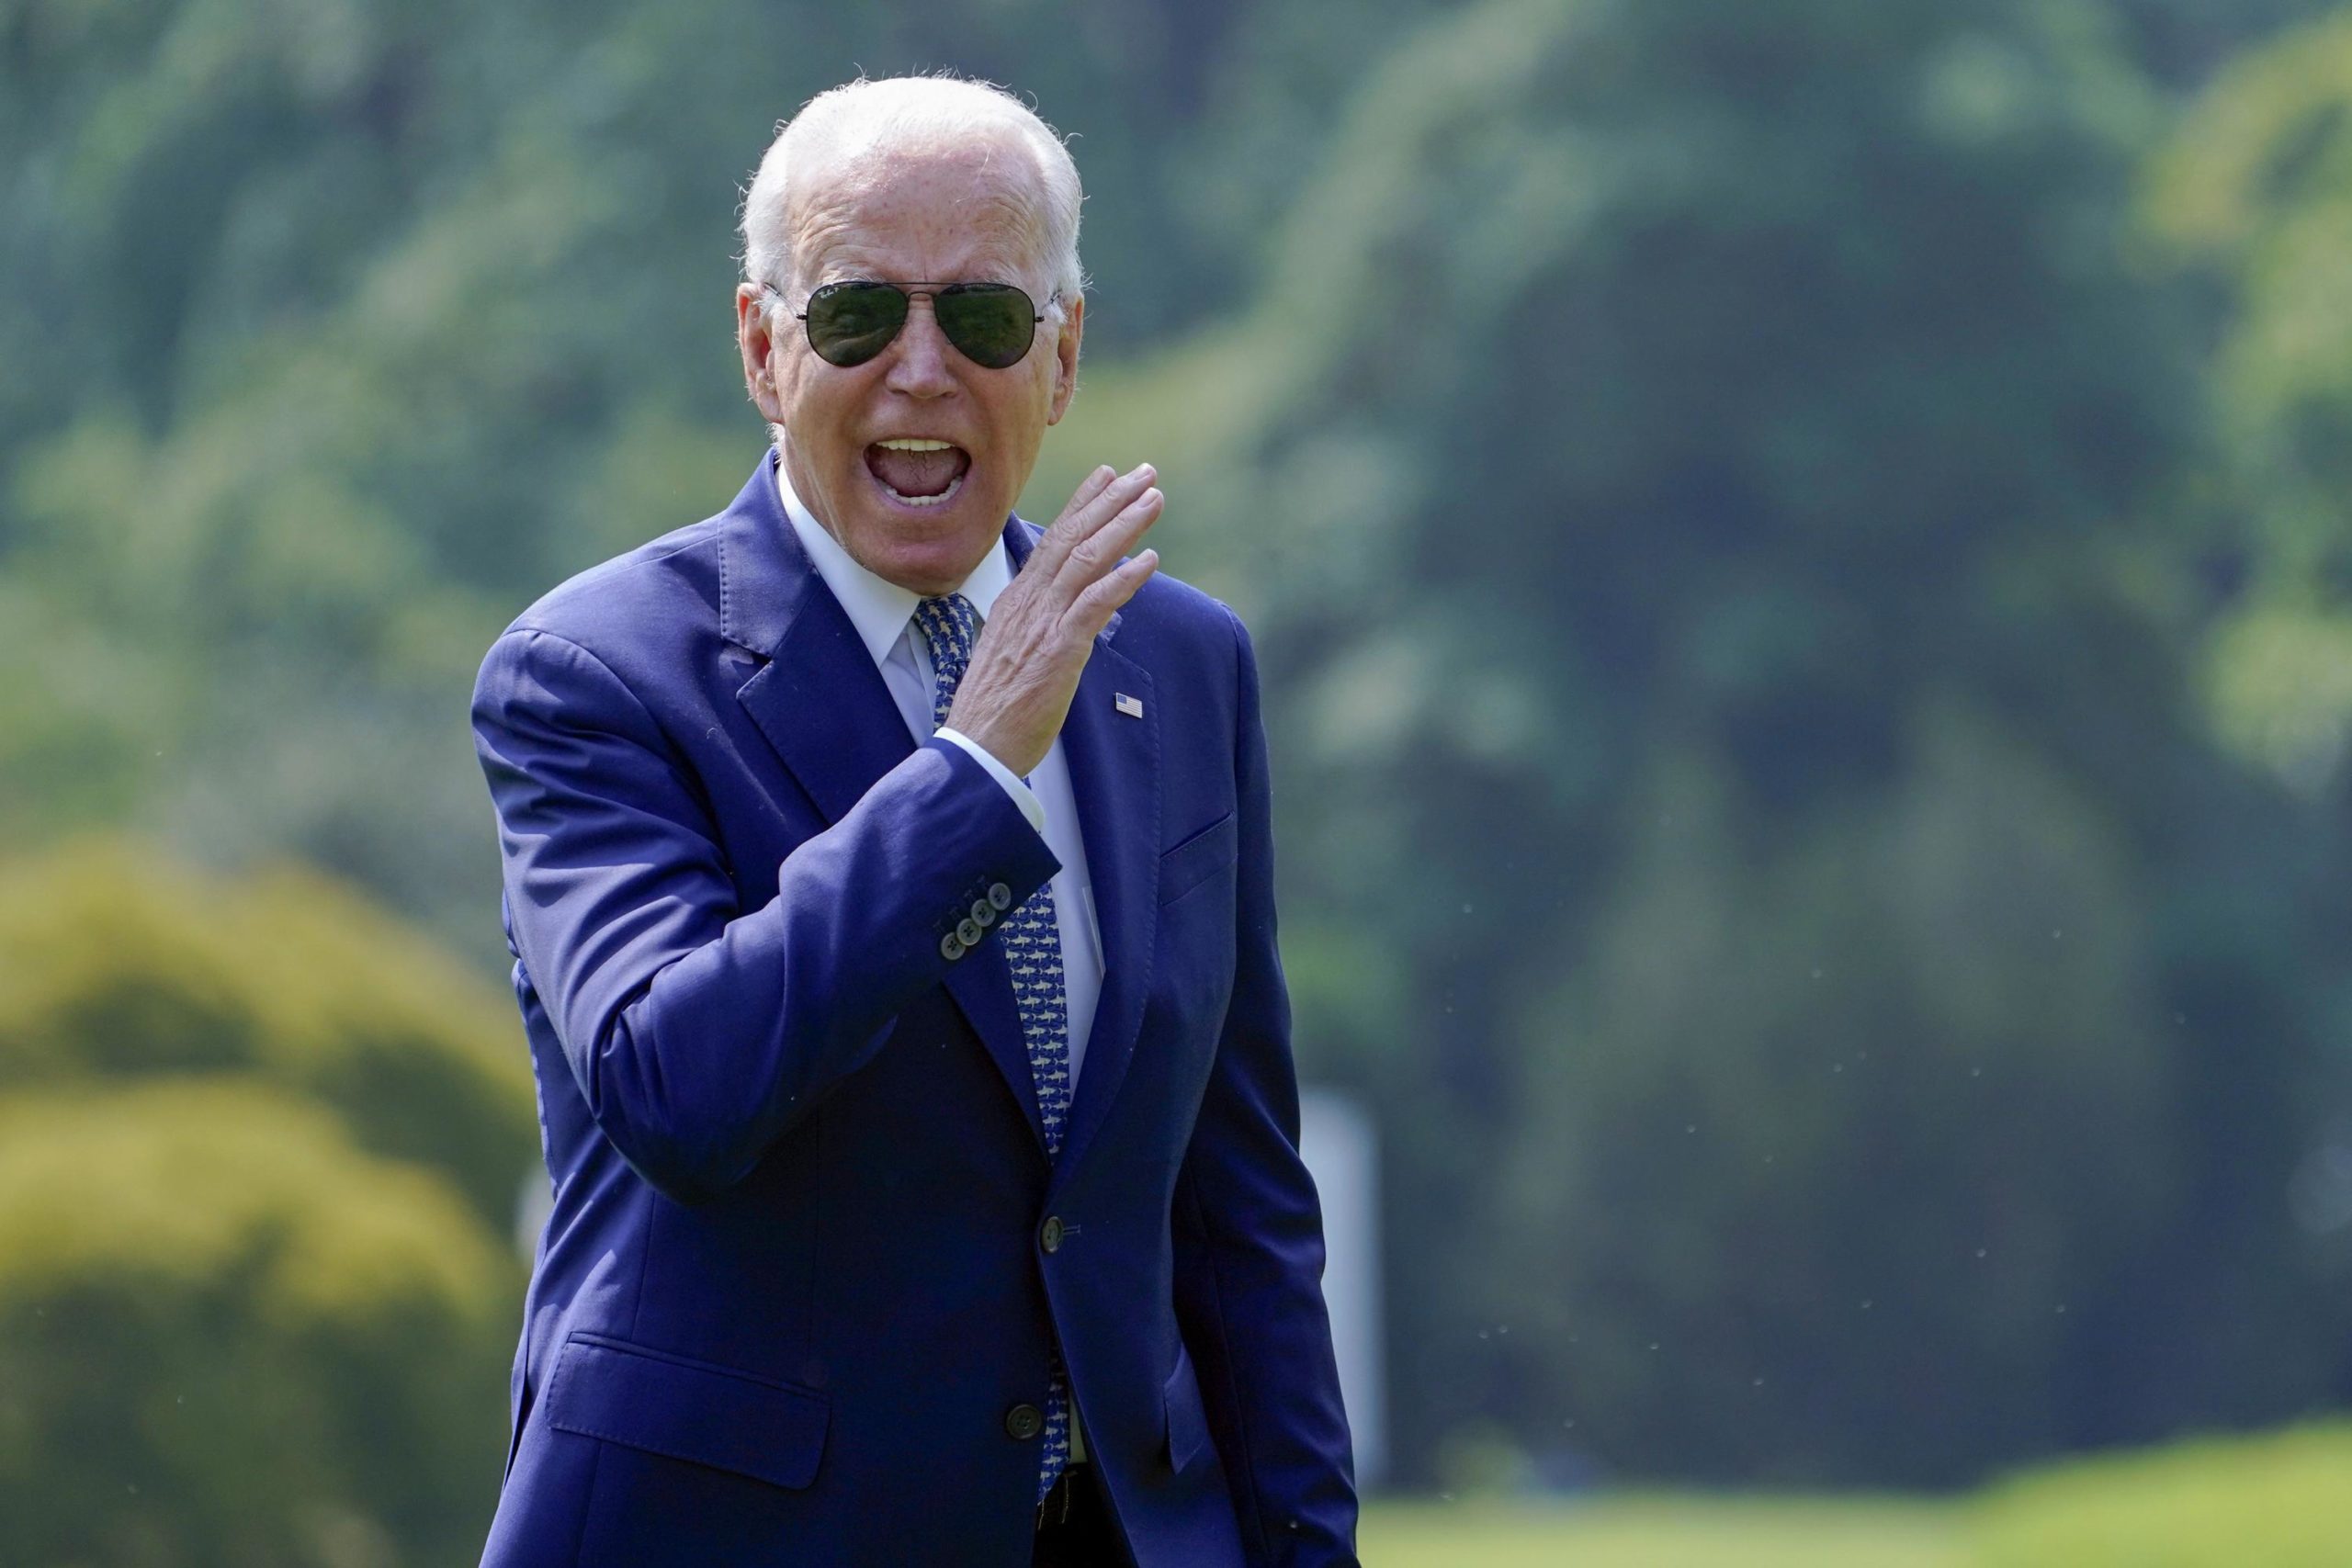 Biden vacations at Delaware beach house after week of heavy losses